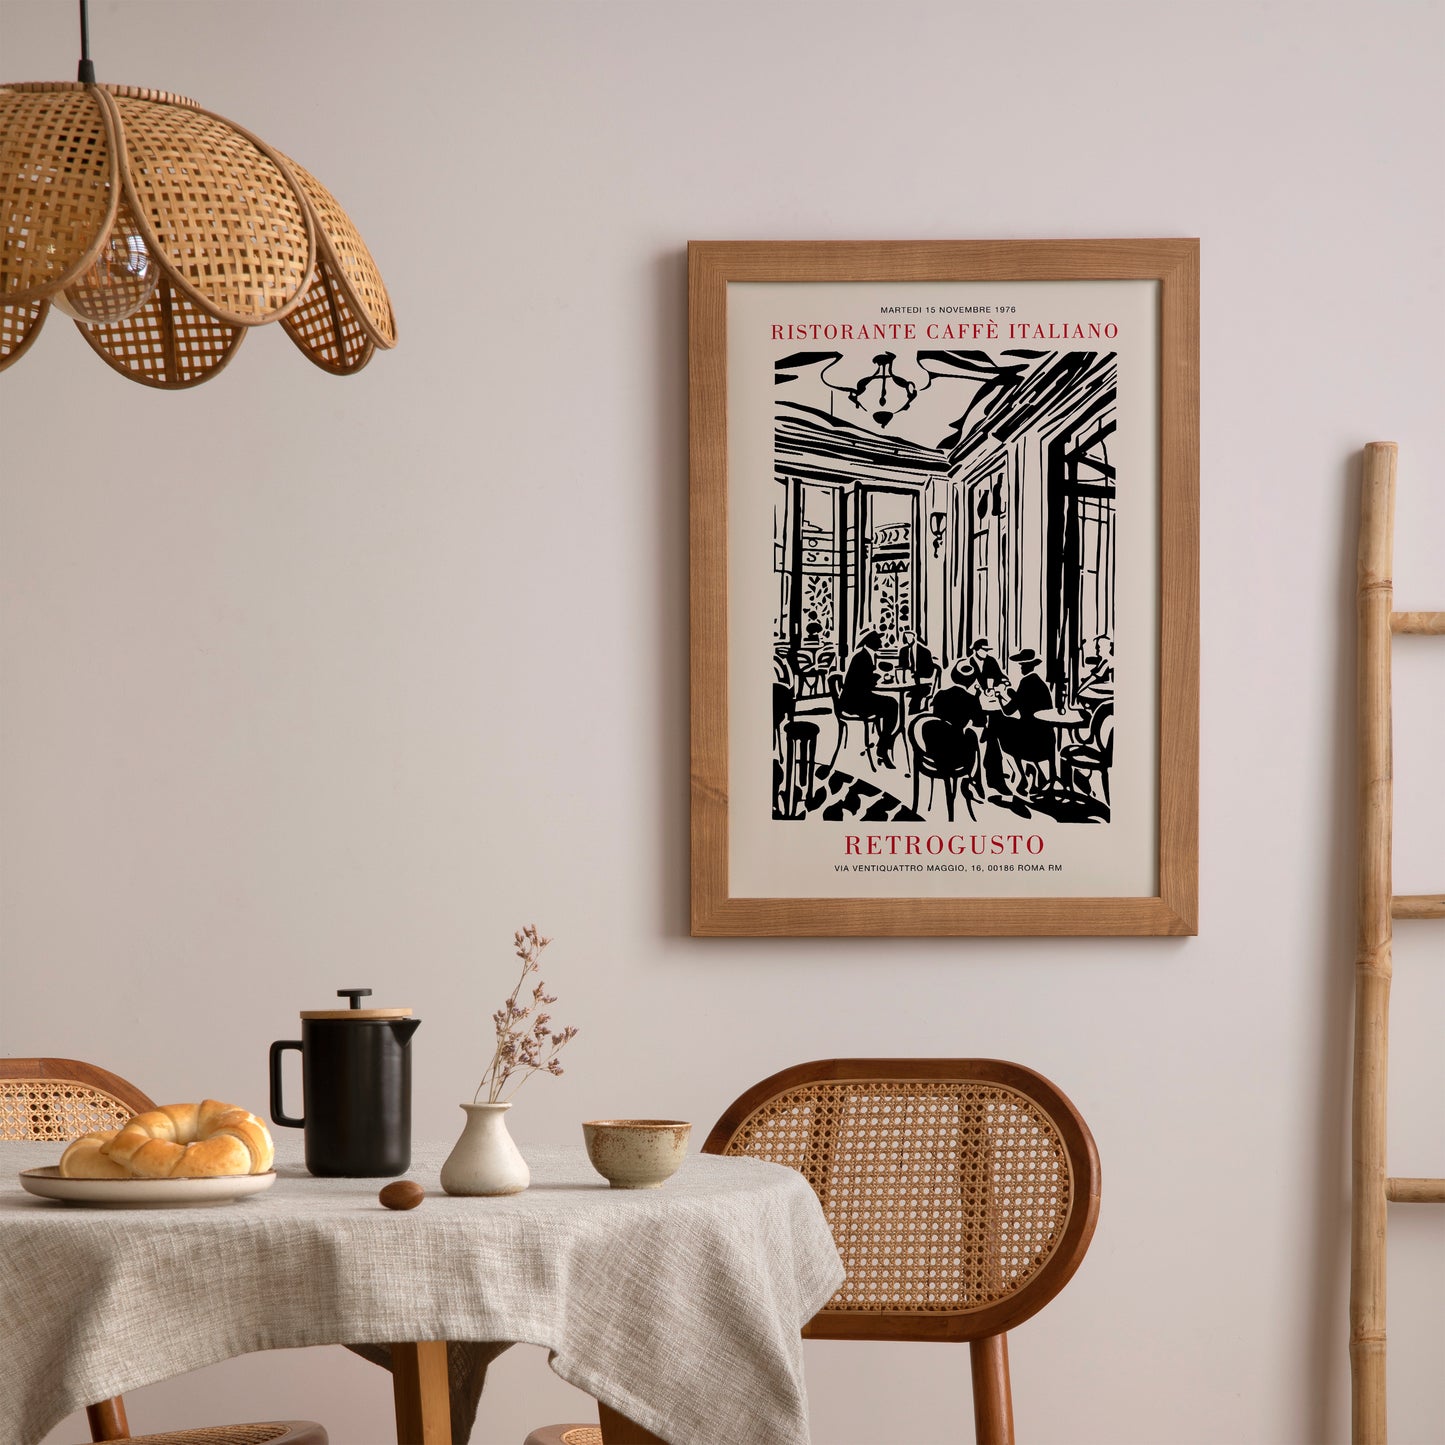 Cafe Italiano Painting Poster